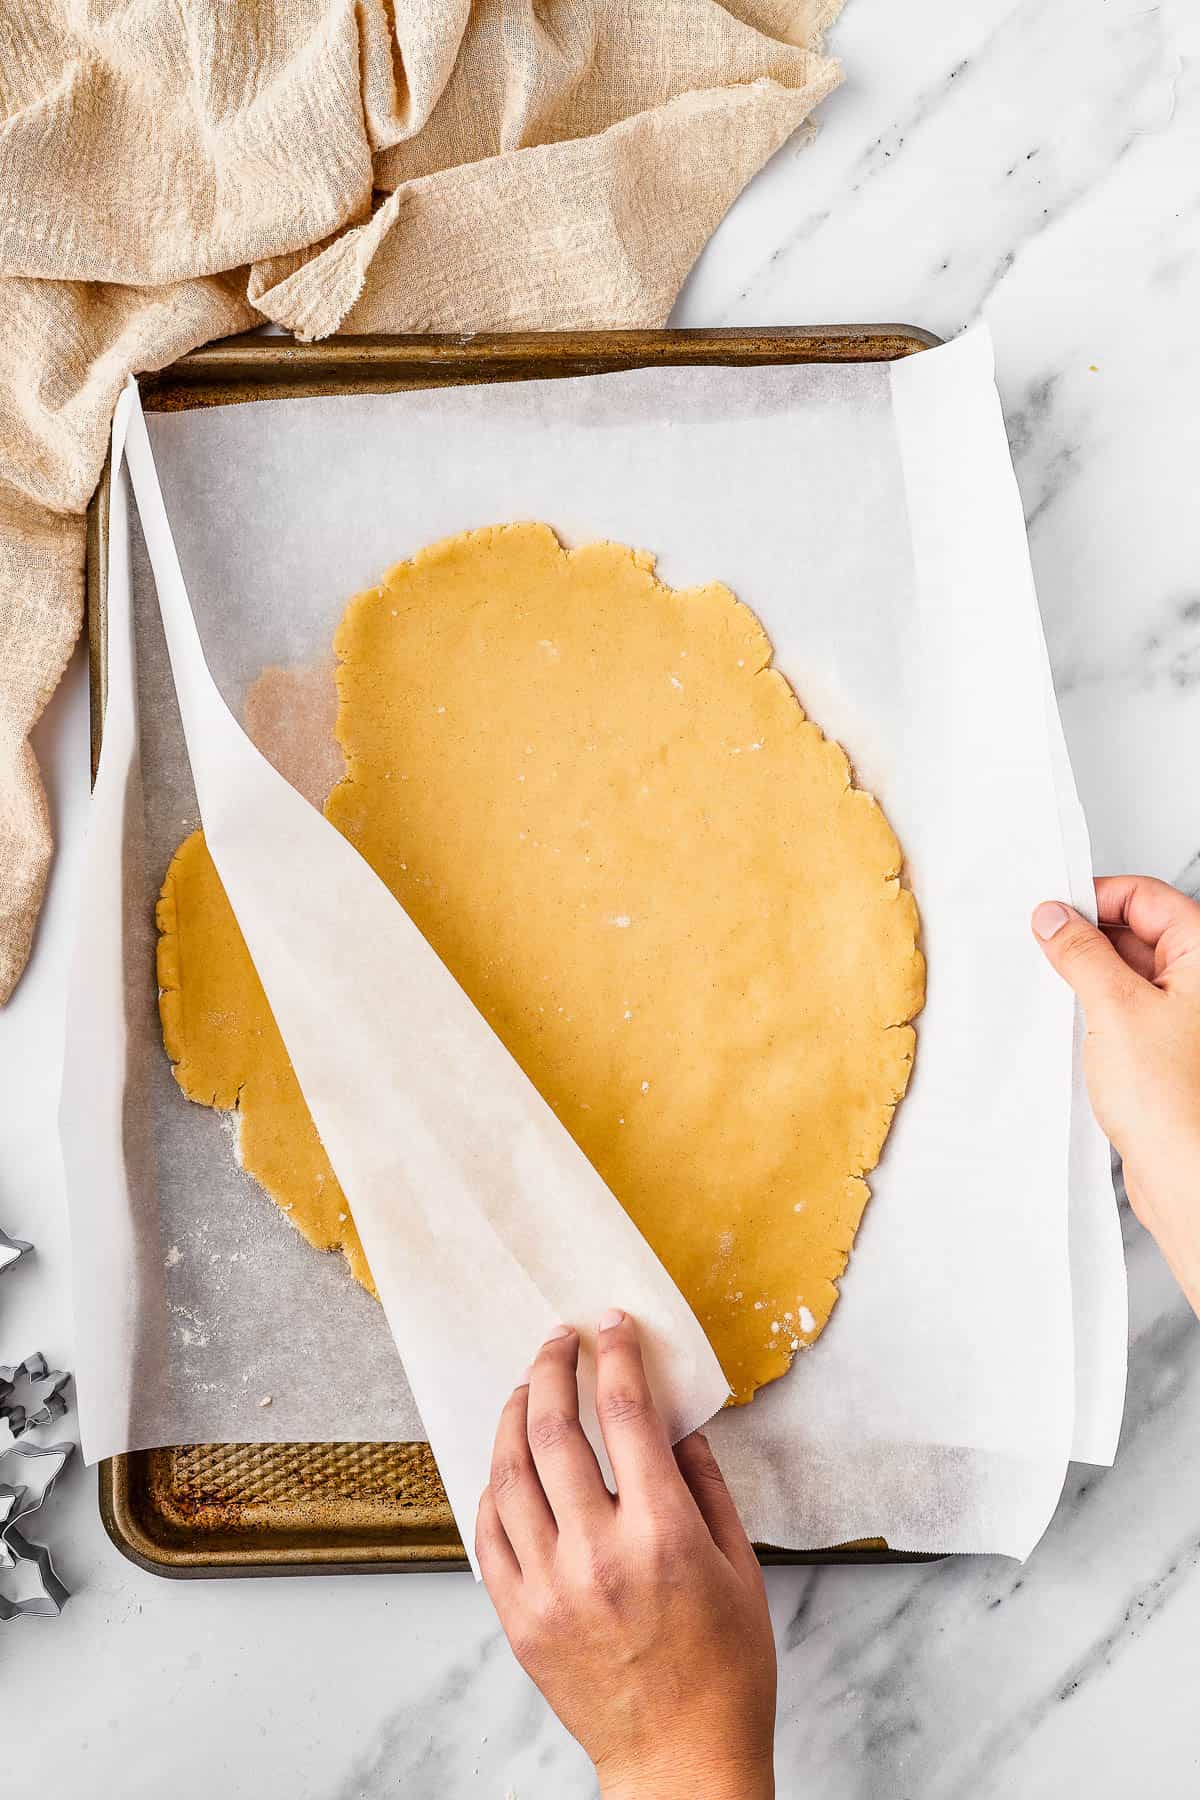 Rolled cookie dough on parchment.